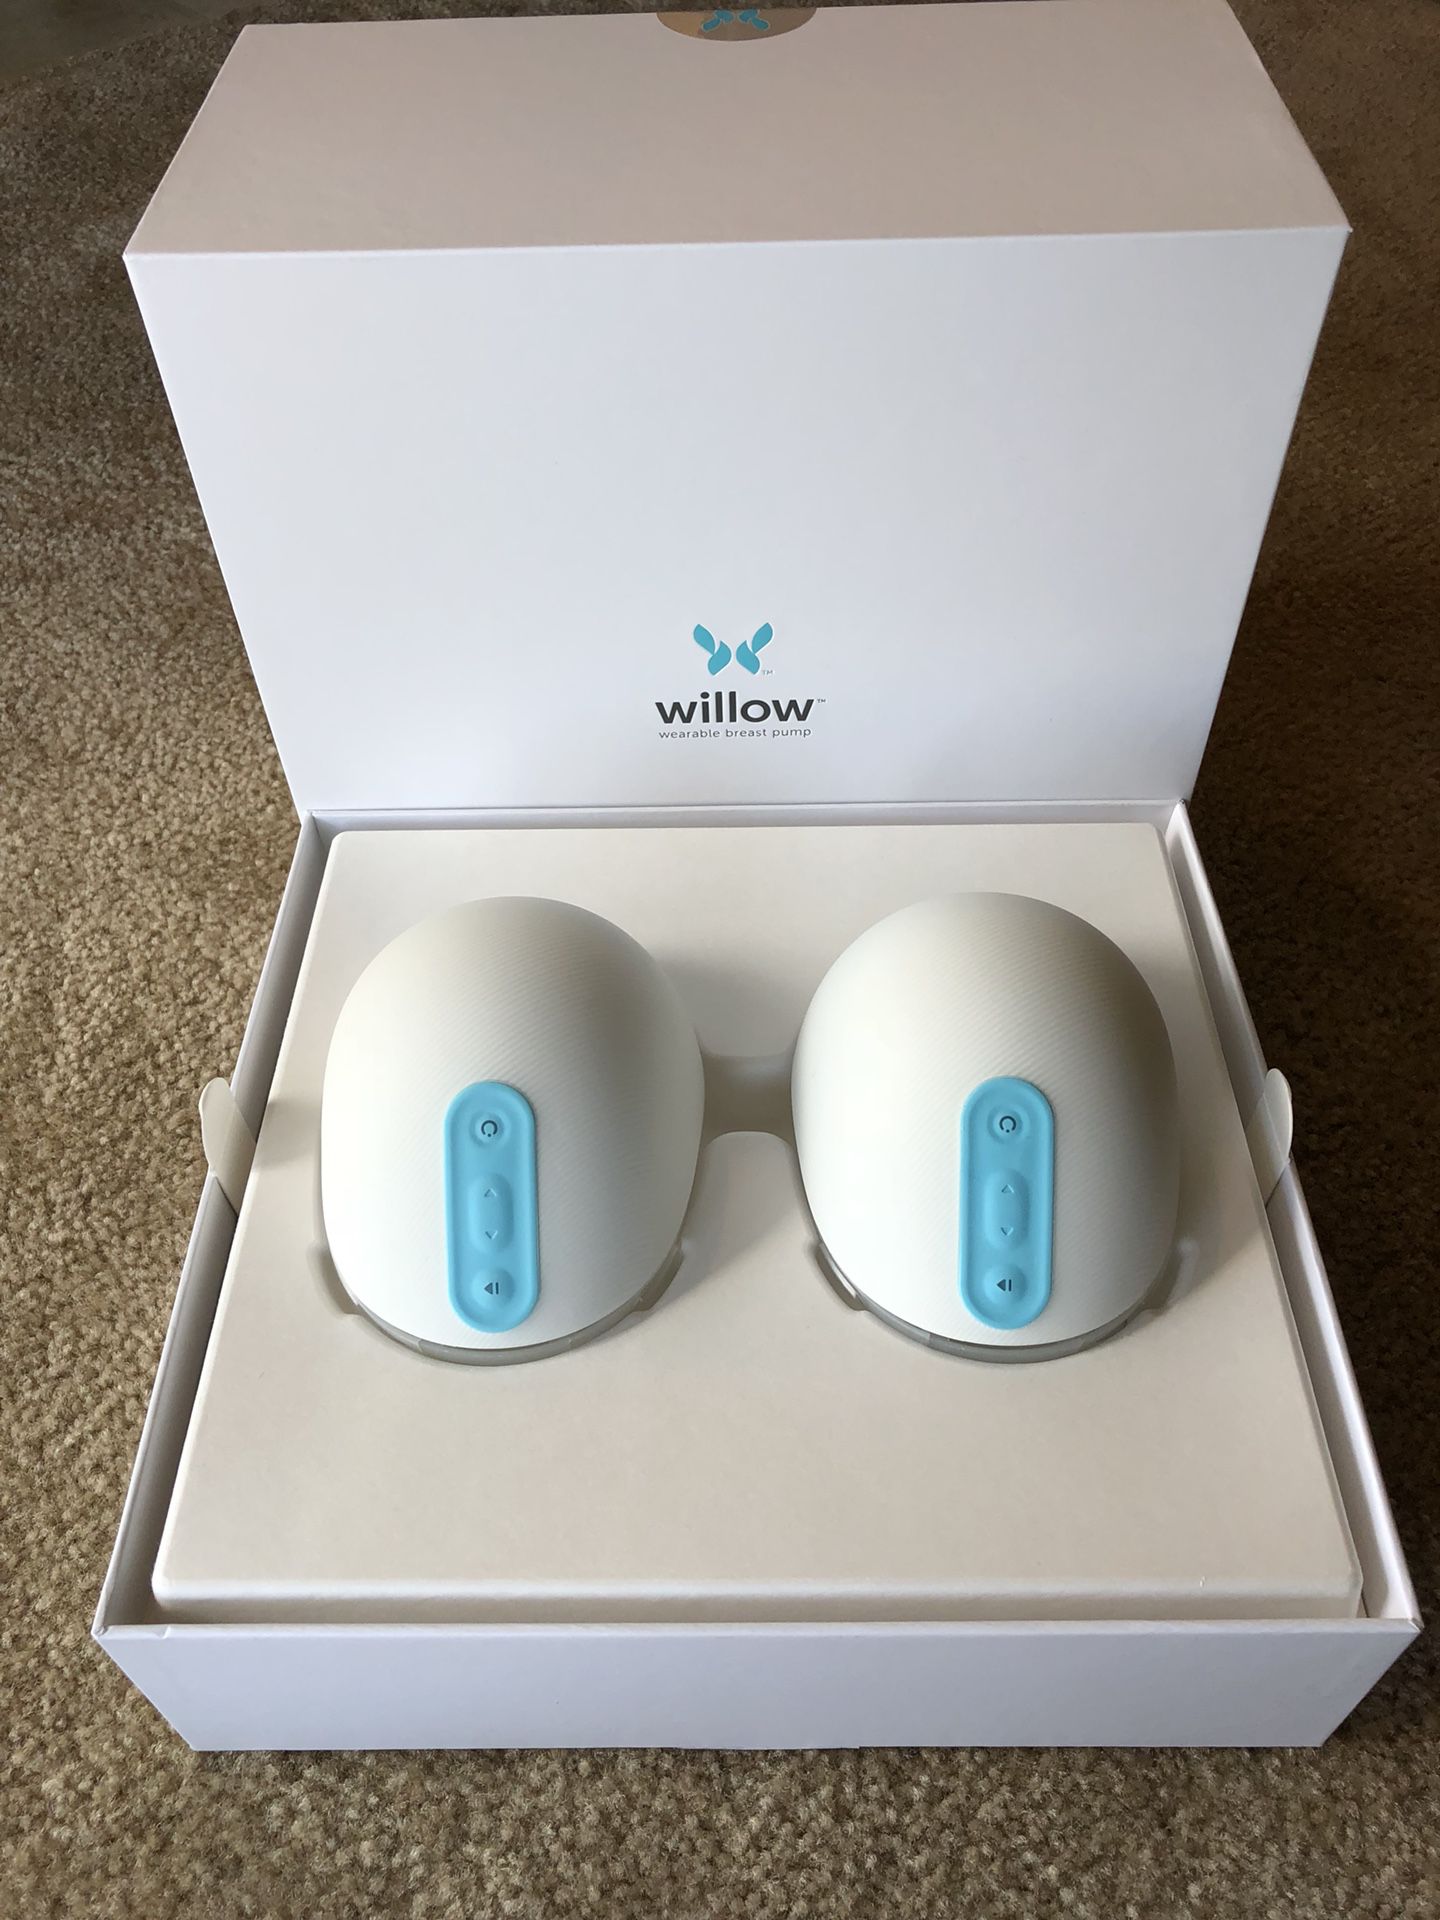 Willow Wearable Breast Pump for Sale in North Las Vegas, NV - OfferUp